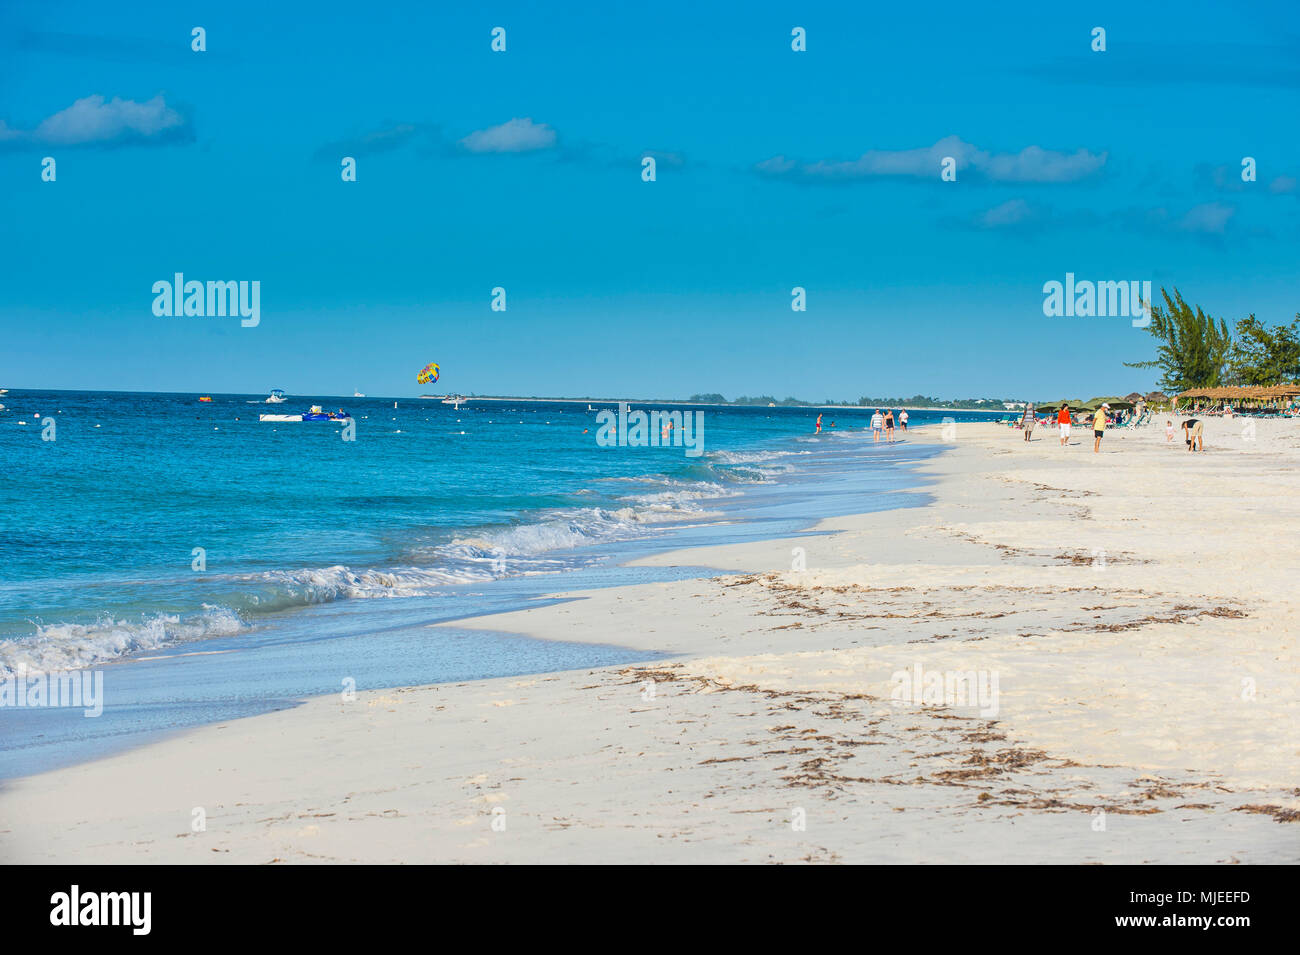 World famous Grace bay beach, Providenciales, Turks and Caicos Stock Photo